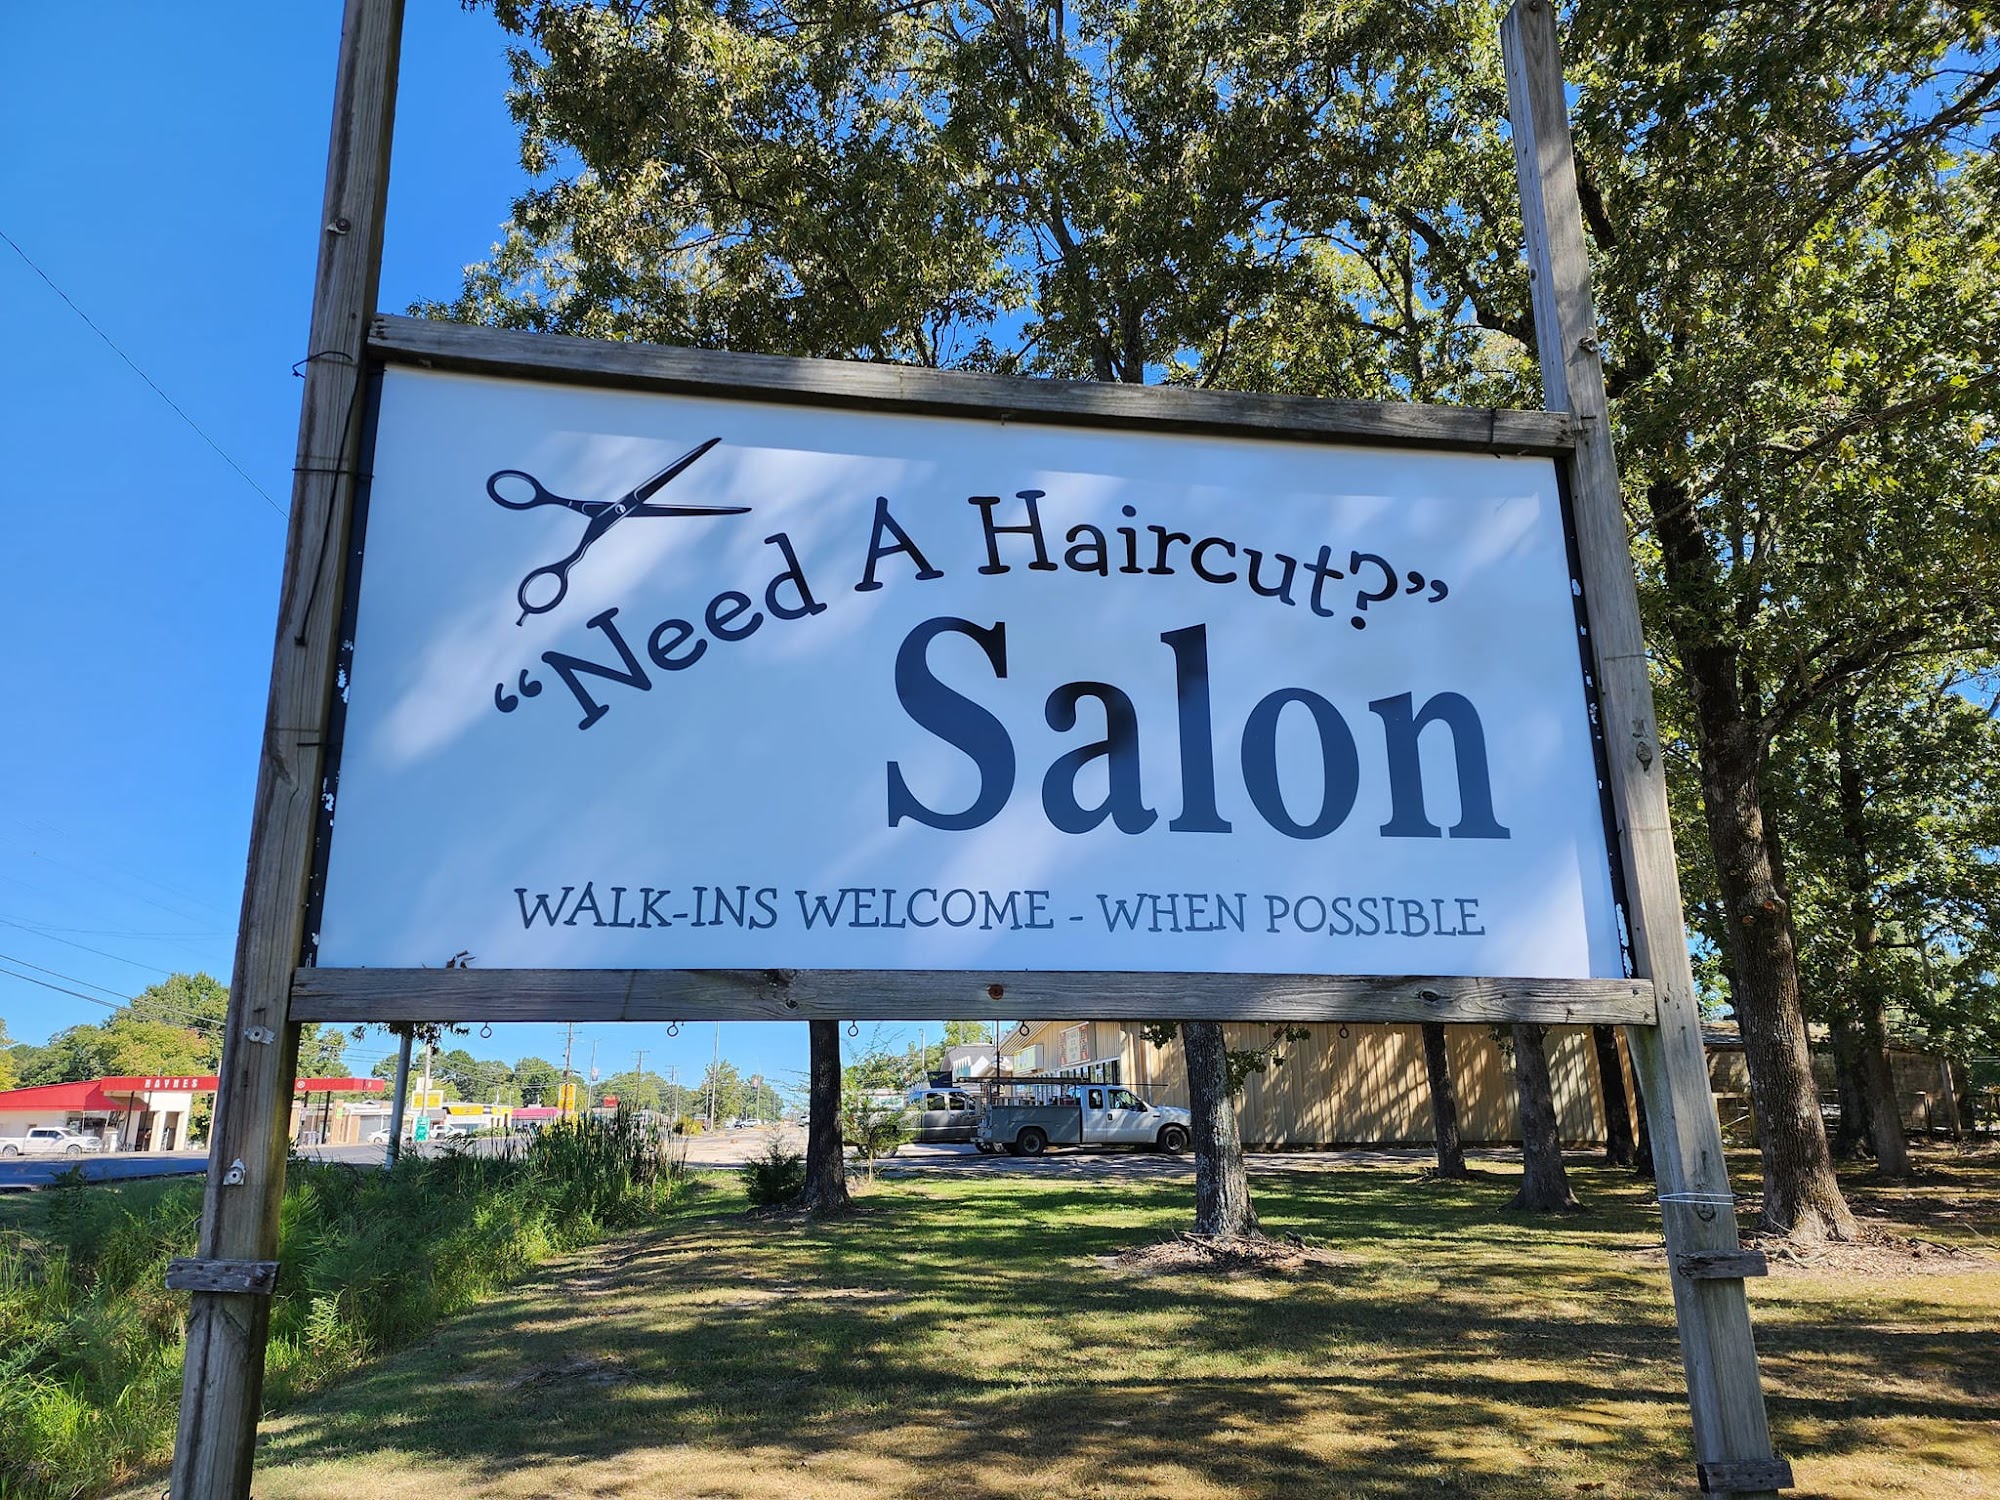 Need A Haircut? 1108 City Ave N, Ripley Mississippi 38663